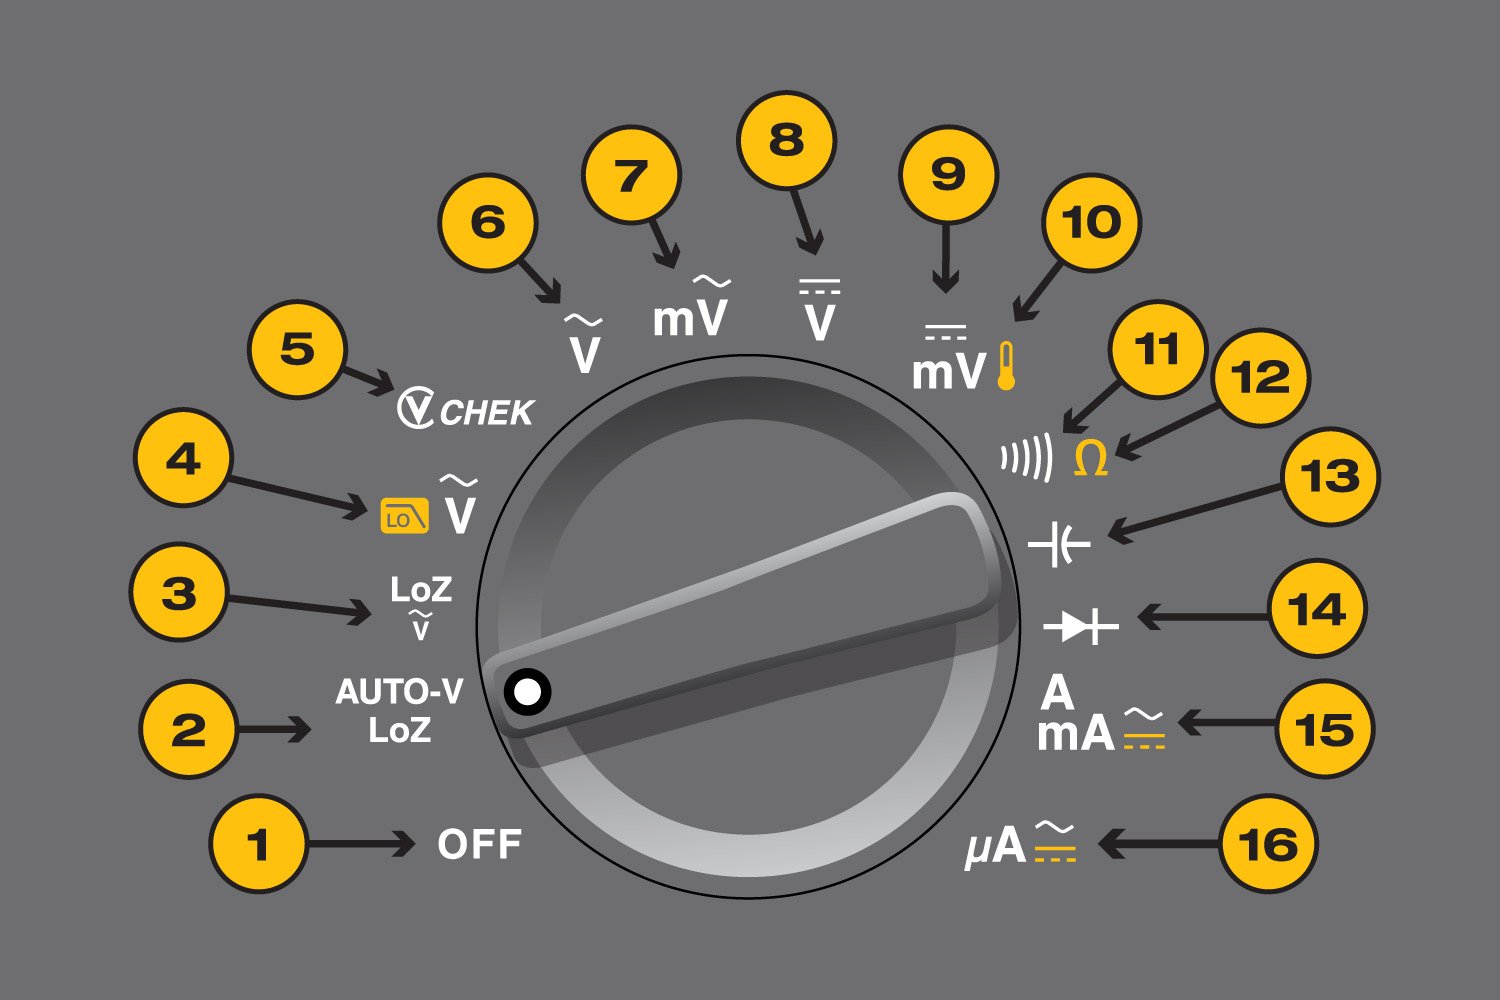 How To Check Amps In Multimeter The Dials, Buttons, Symbols, and Display of a Digital Multimeter | Fluke